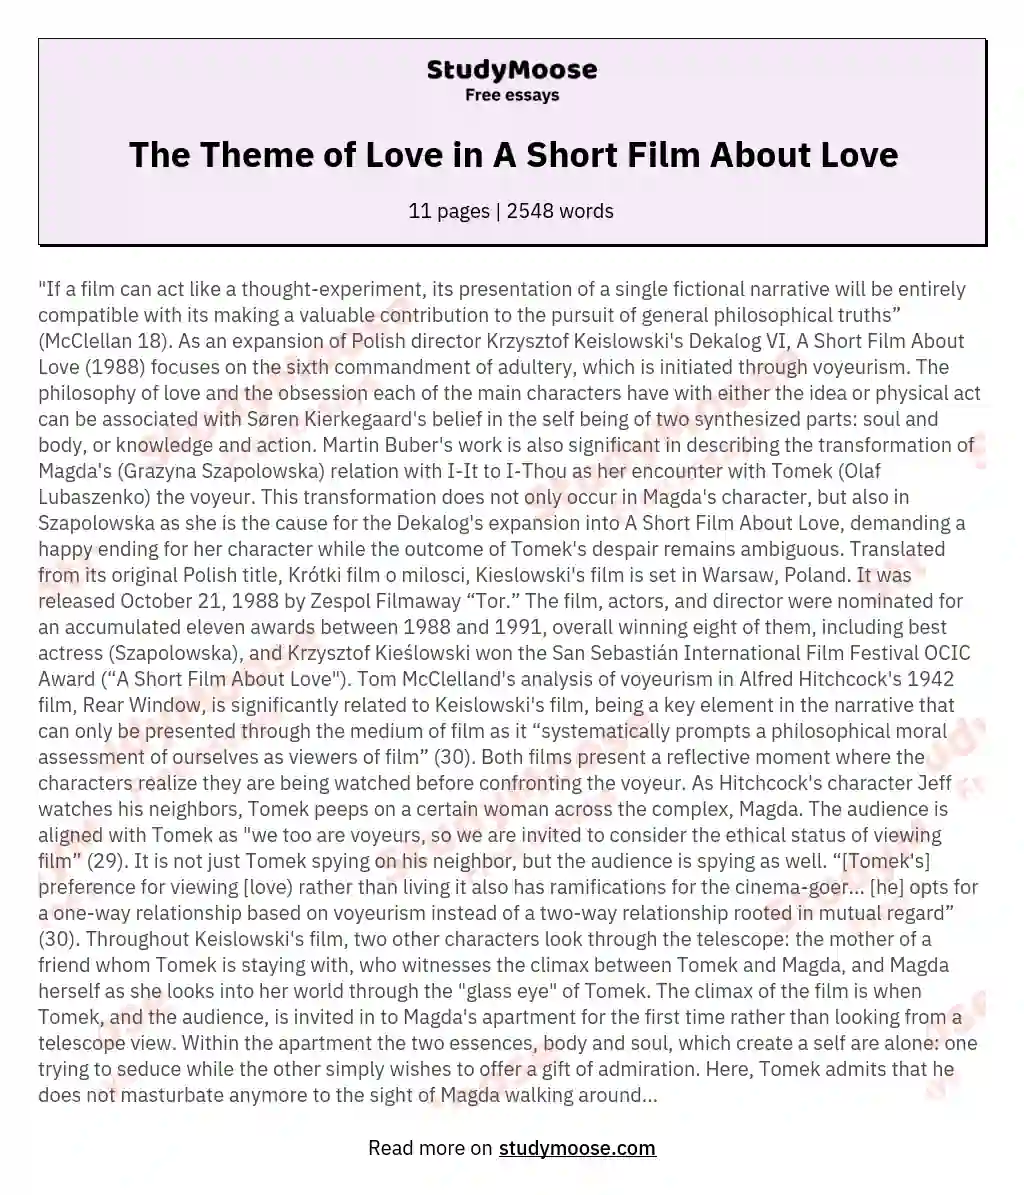 The Theme of Love in A Short Film About Love essay